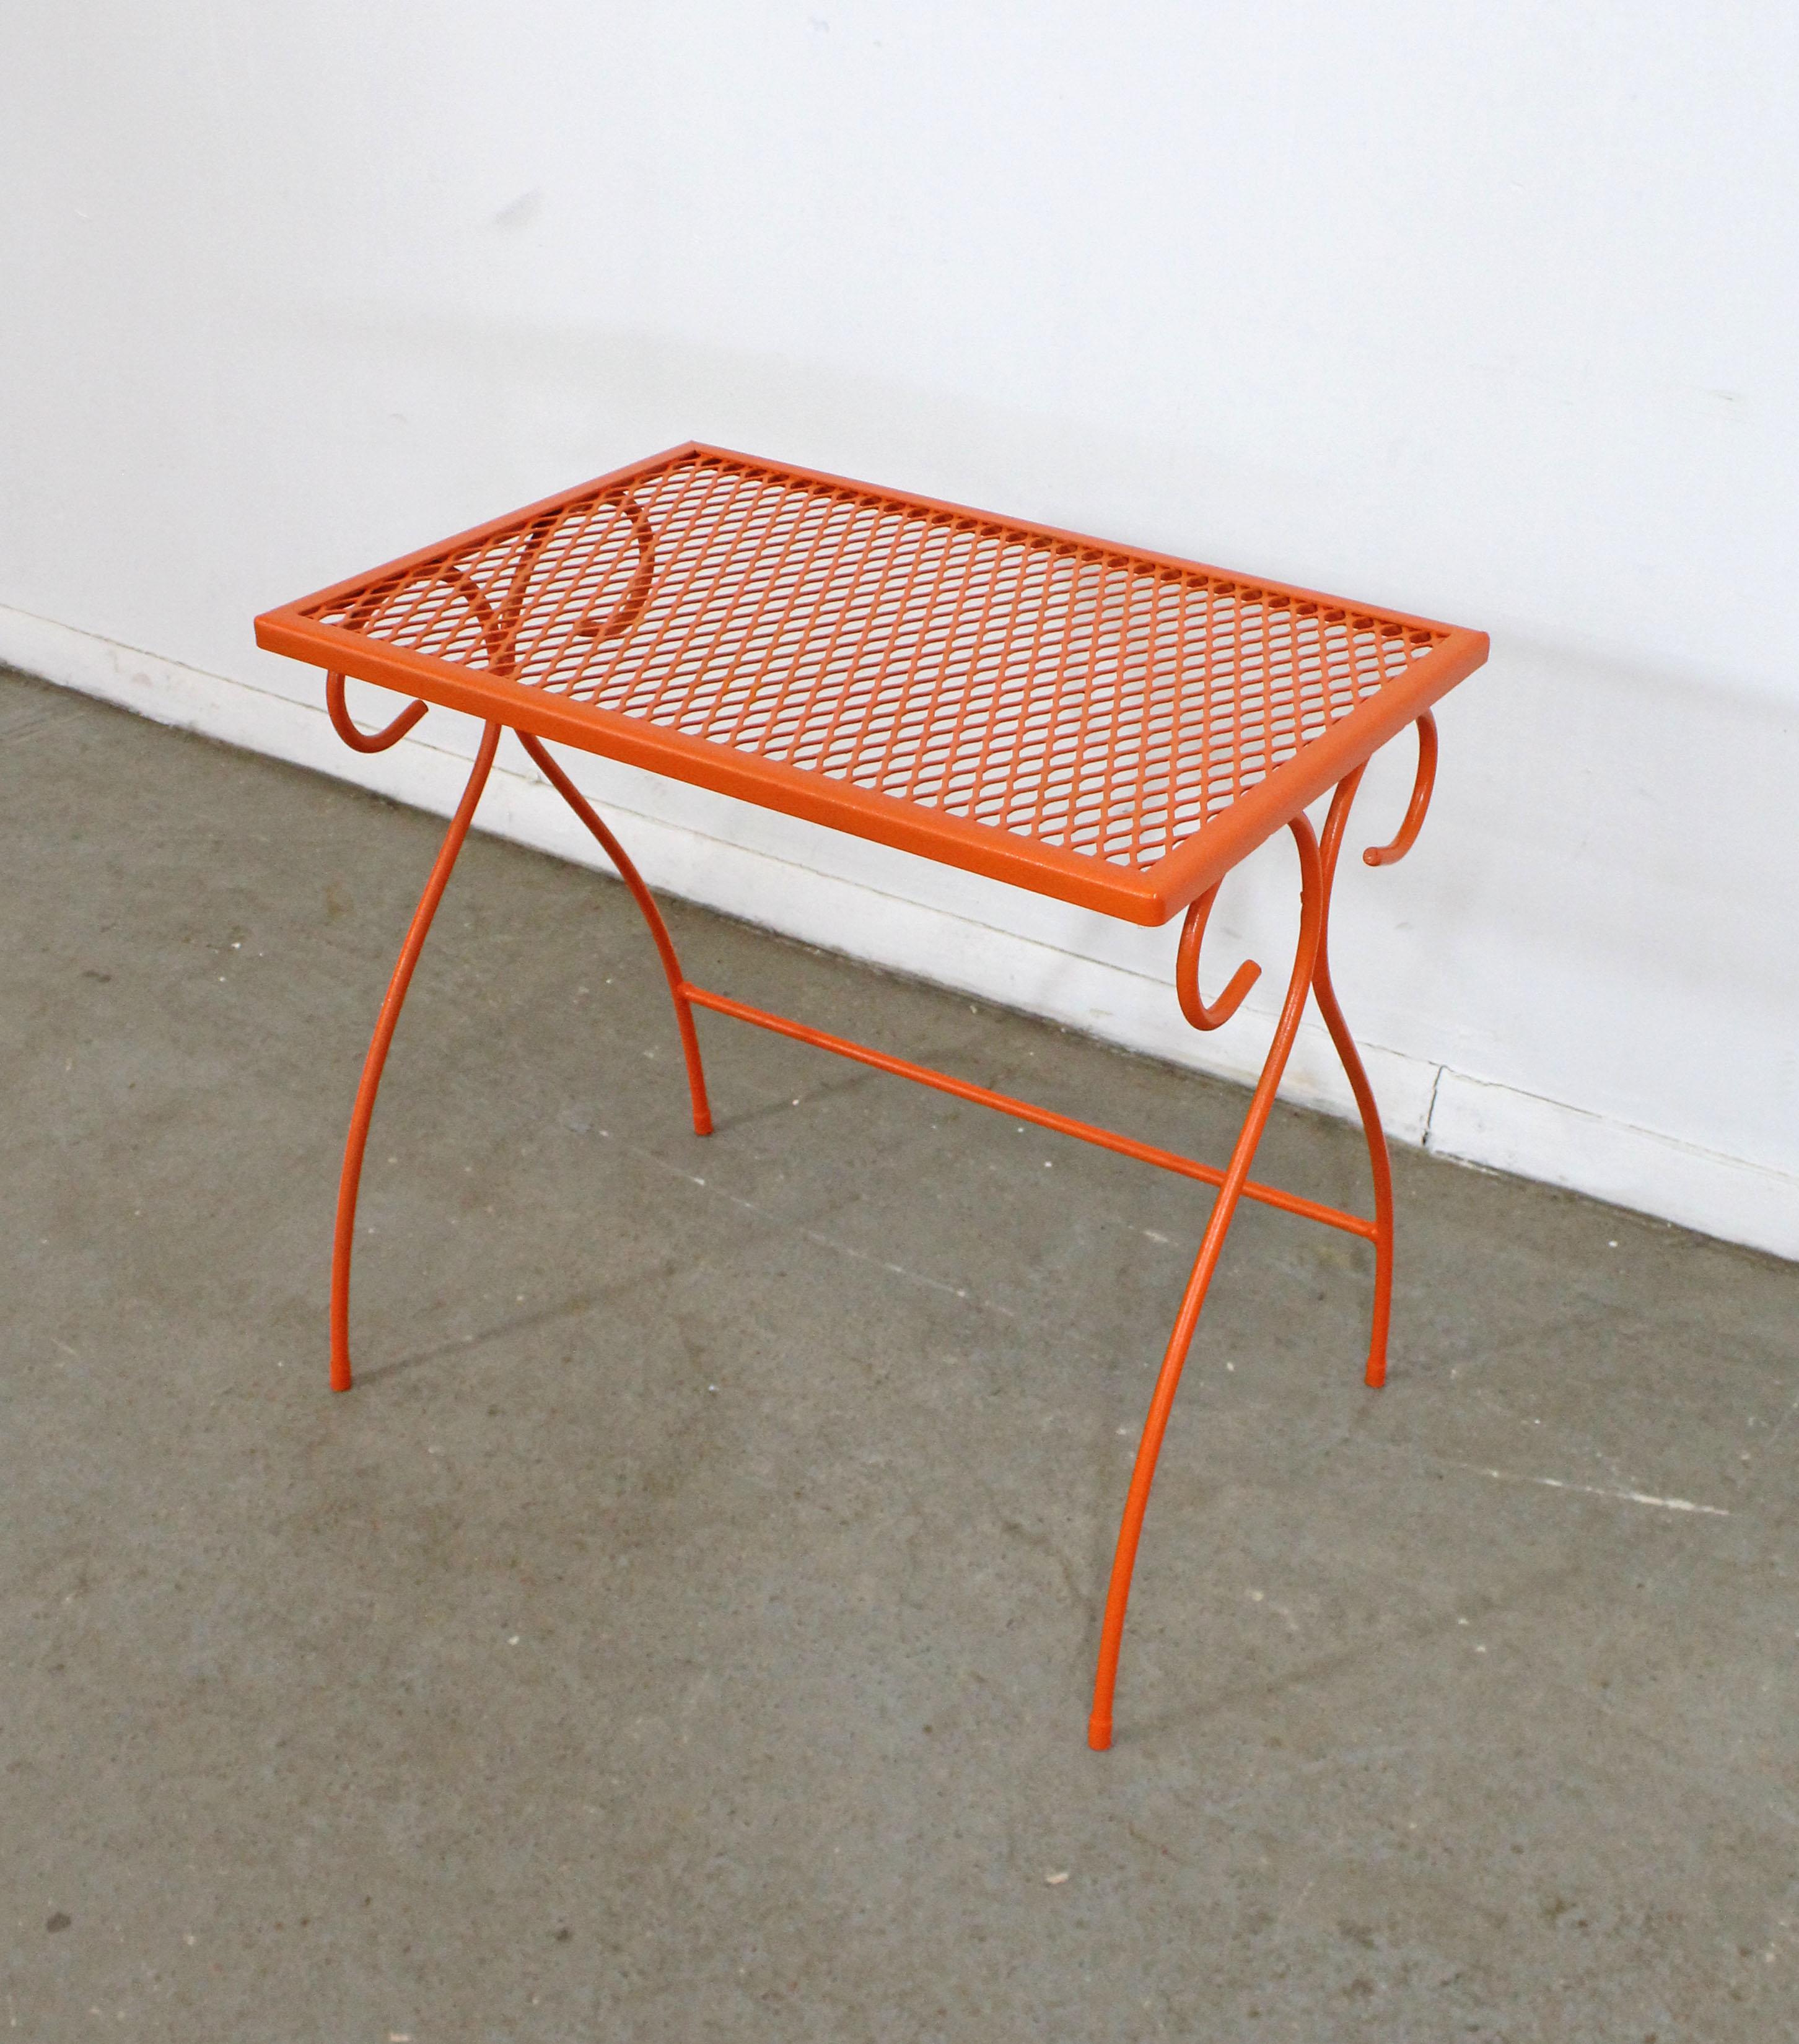 What a find. Offered is a rare midcentury outdoor/patio side table made by Homecrest Bottemiller, circa 1968. Perfect for outdoor lounging! This piece is made of welded steel and features gracefully styled legs and a mesh top. It is in good